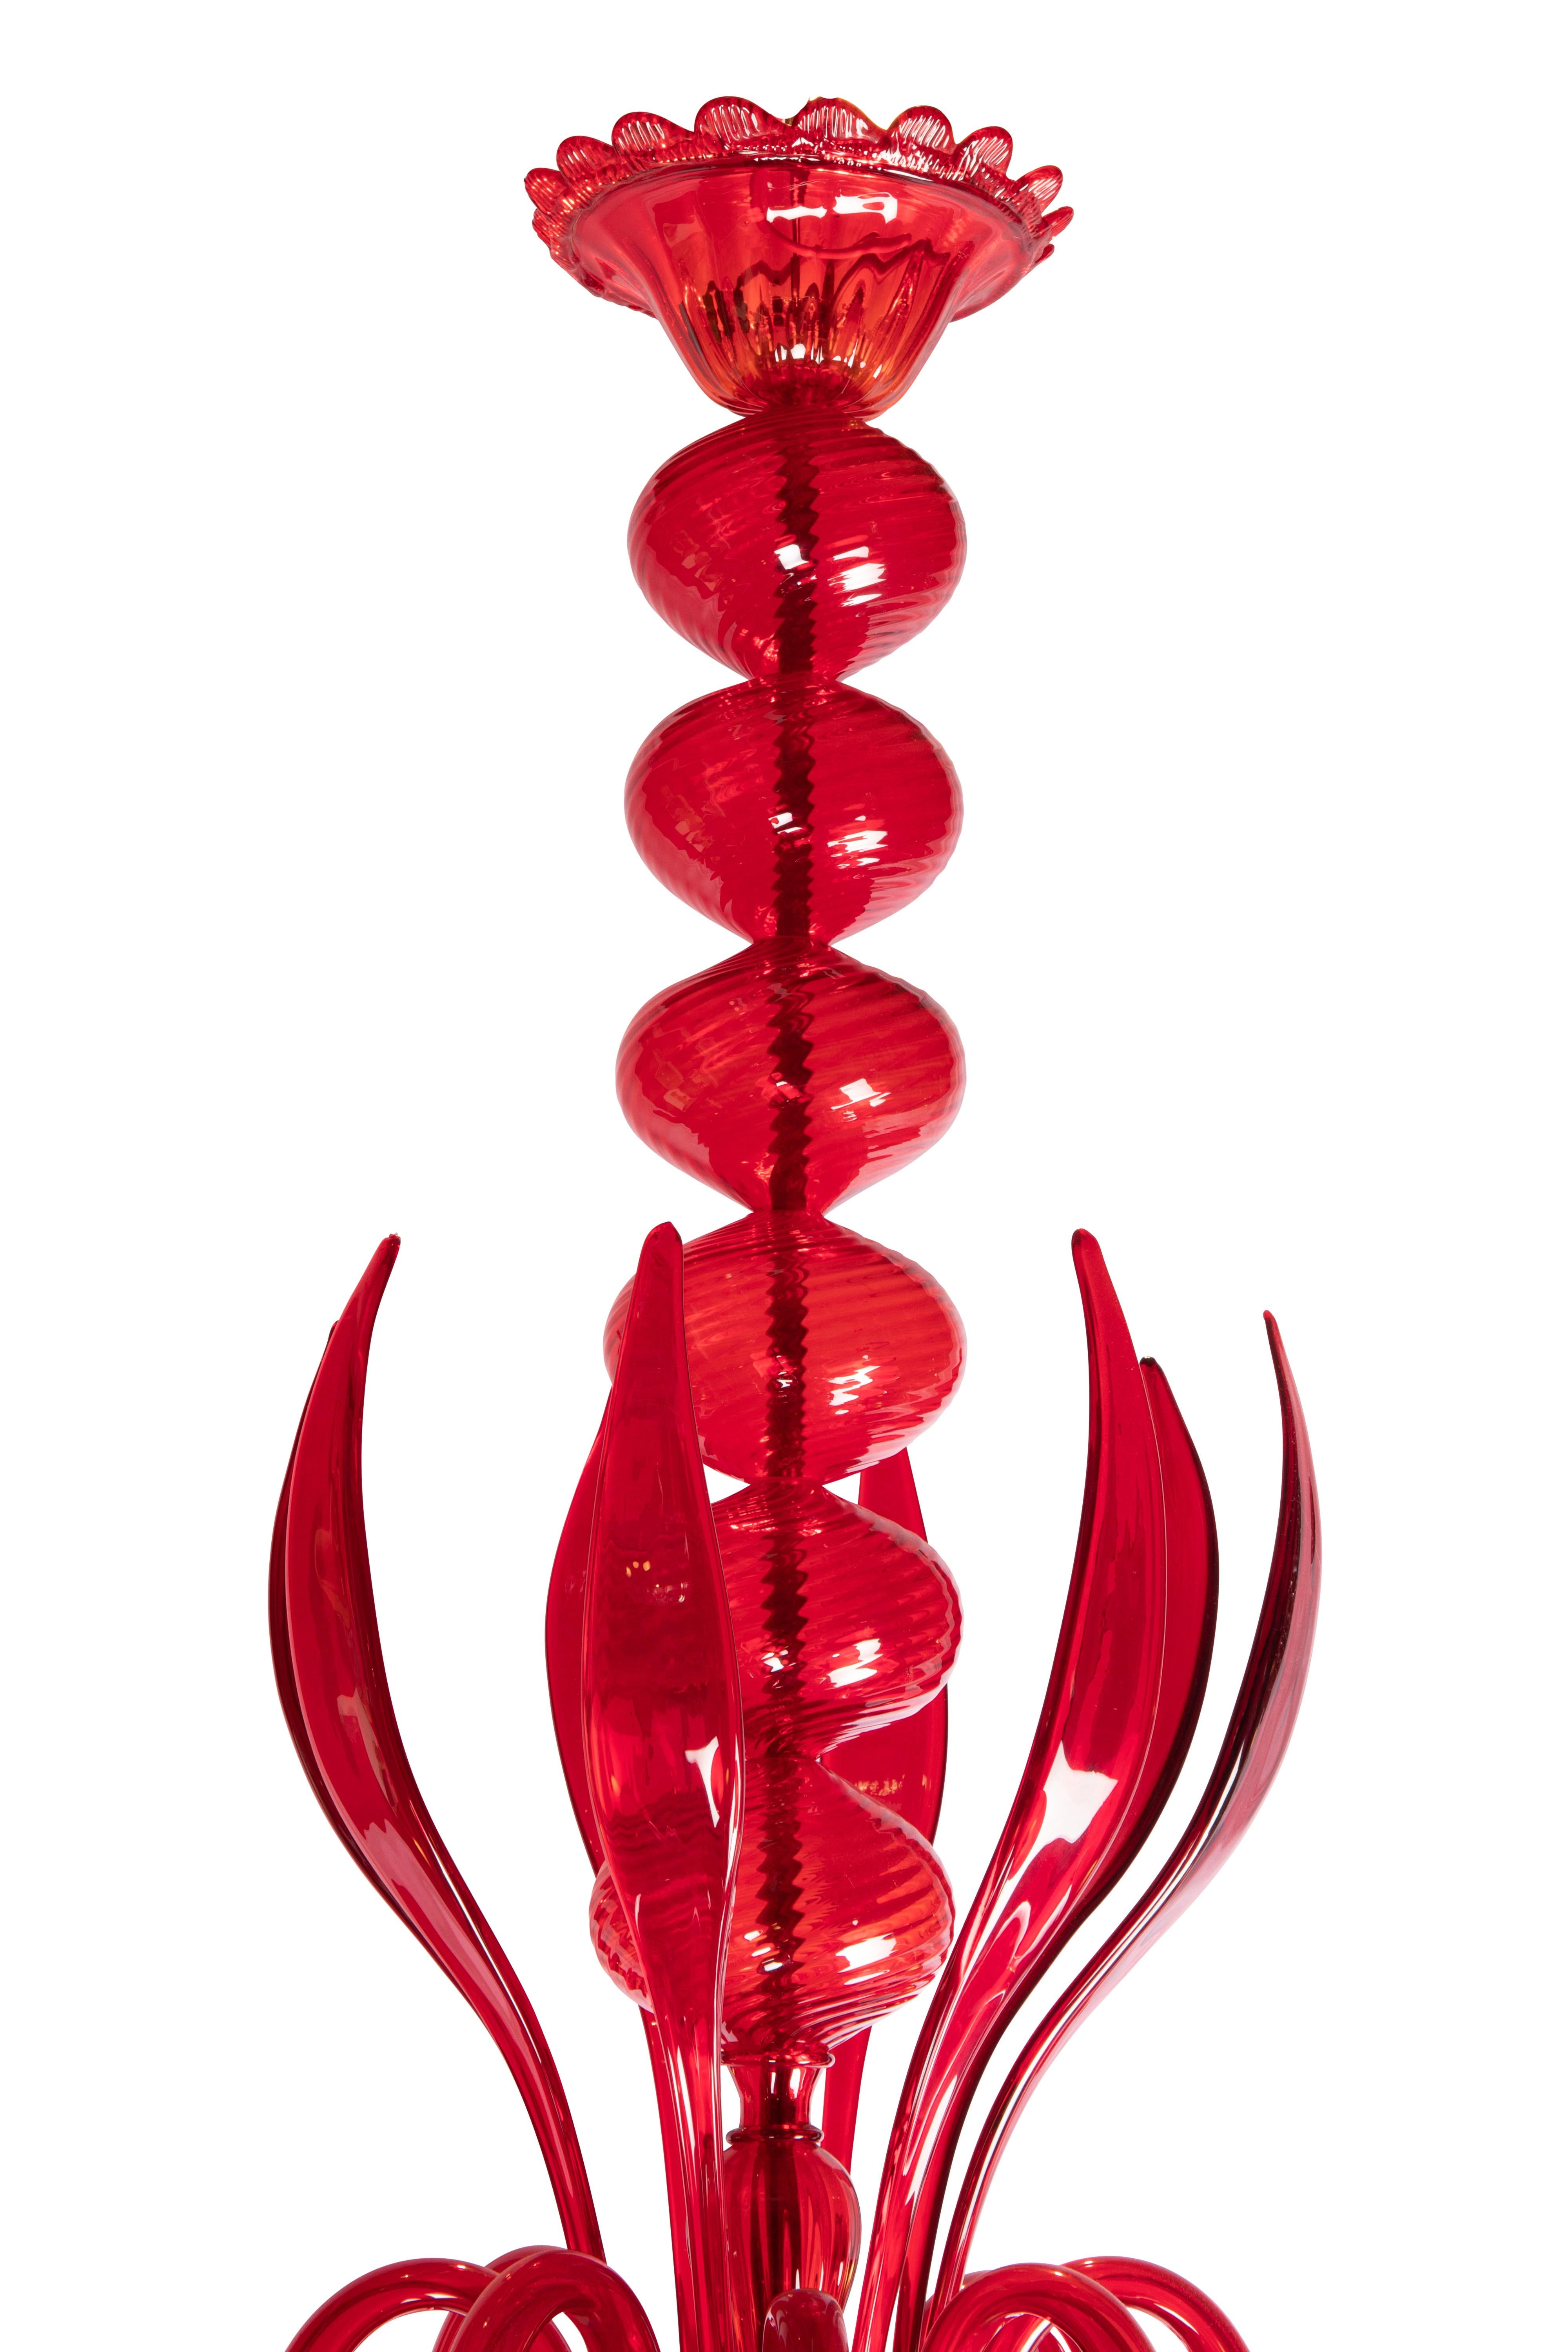 Red blown glass chalice chandelier by Cesare Toso, Murano.

Cesare Toso is a famed artisanal art glass company.

The chandelier has 8 arms and lights, is in perfect condition and dates from the 1980’s.

The balls forming the body of the column